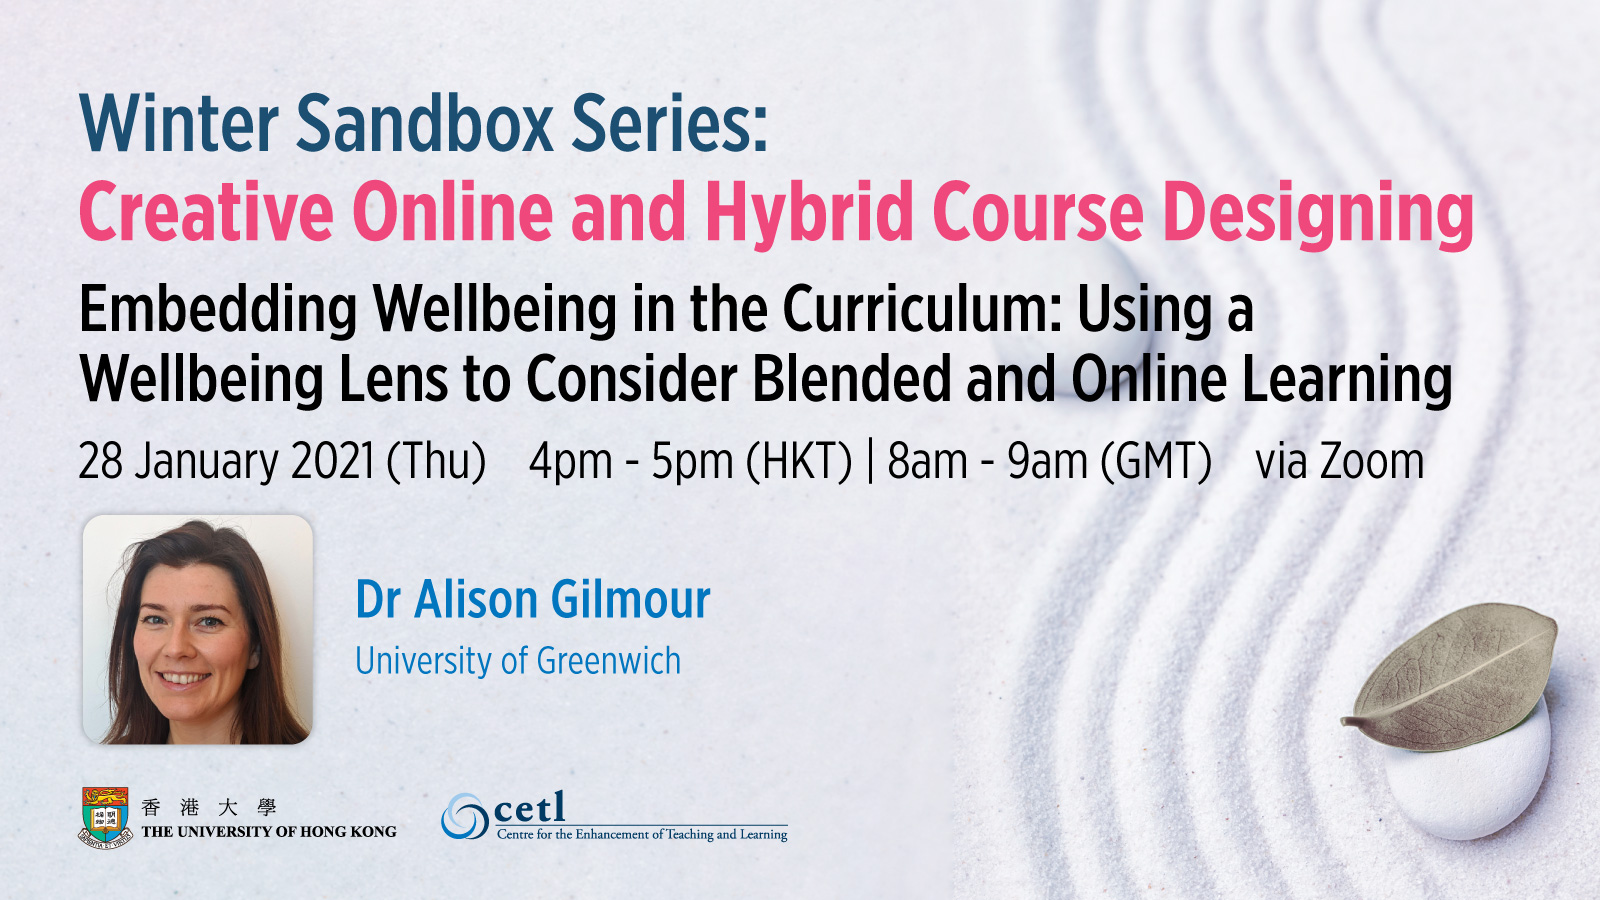 Session 6: Embedding wellbeing in the curriculum: using a wellbeing lens to consider blended and online learning